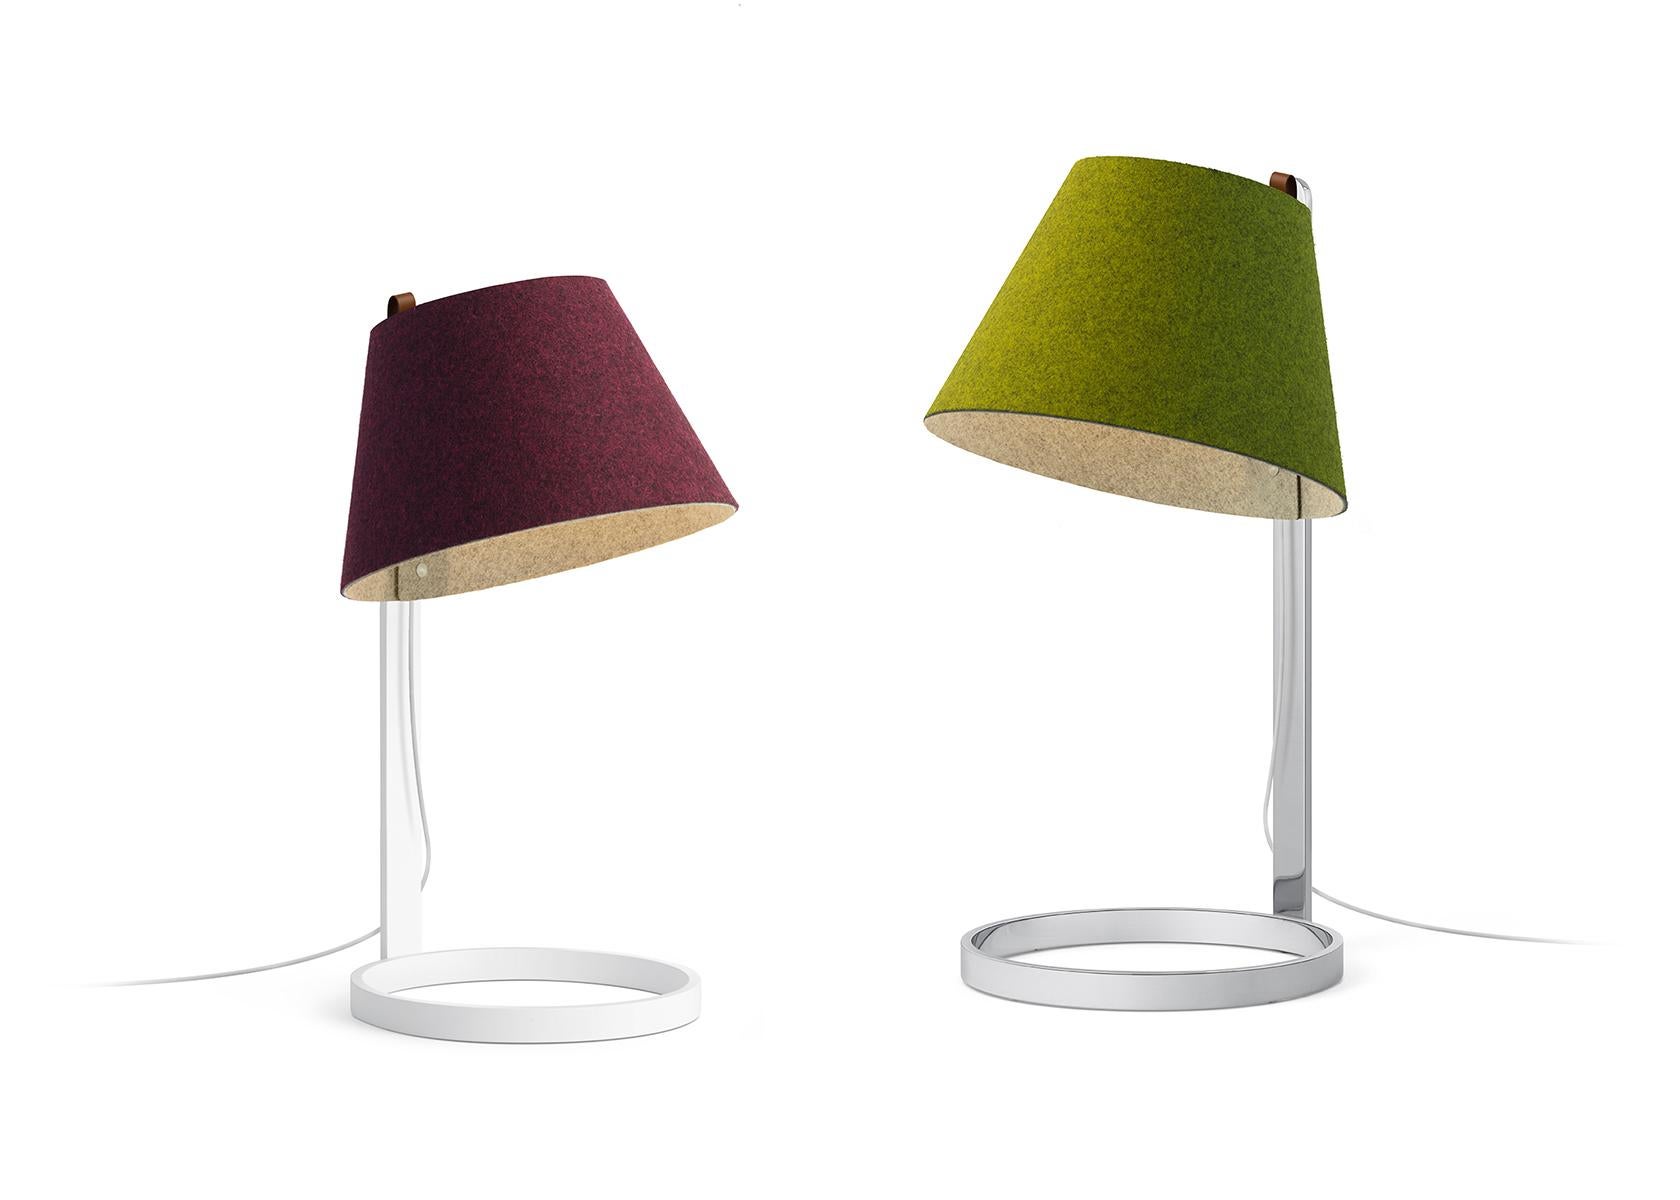 Modern Lana Large Table Lamp in Plum & Grey with White Base by Pablo Designs